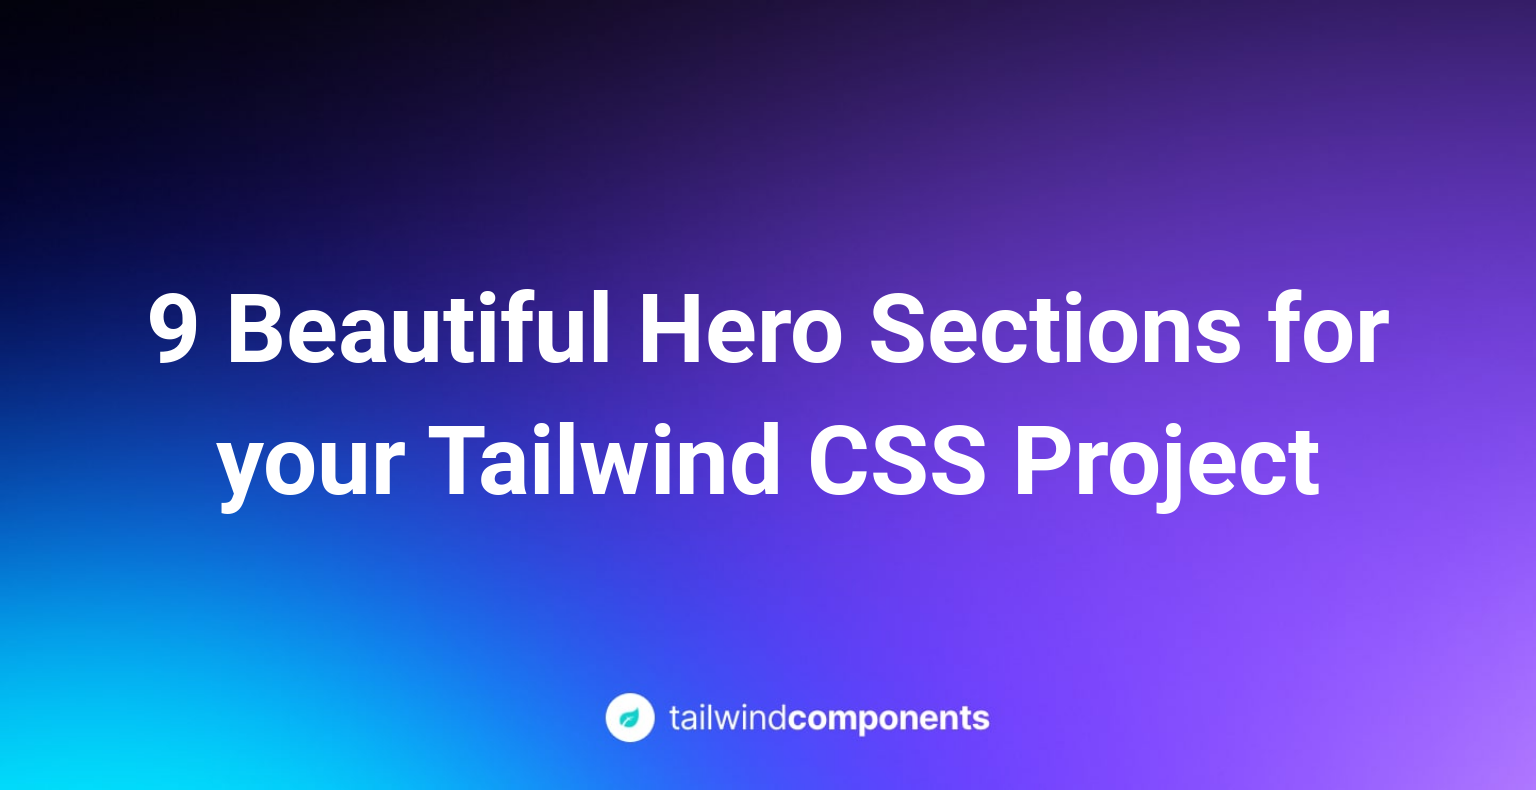 9 Beautiful Hero Sections for your Tailwind CSS Project